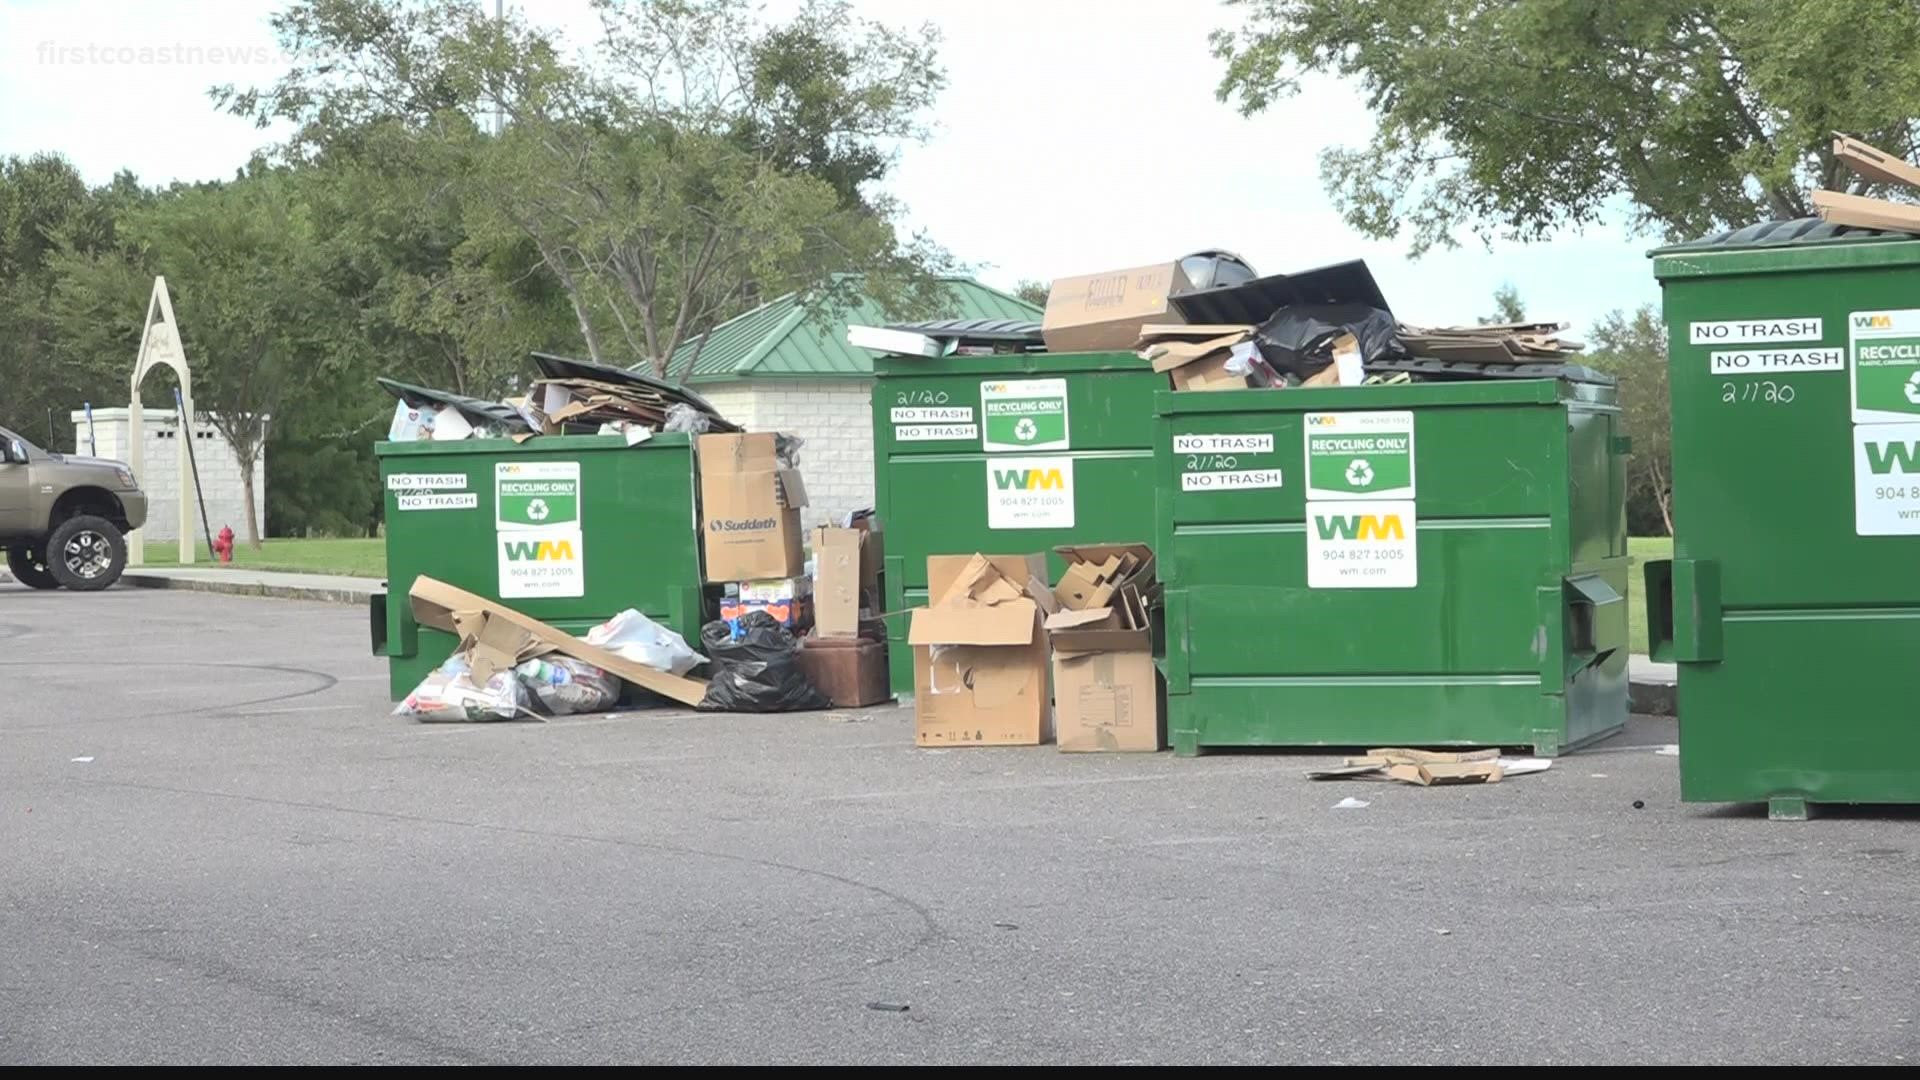 The city says home recycling collection is being suspended so it can focus on yard waste collection instead.